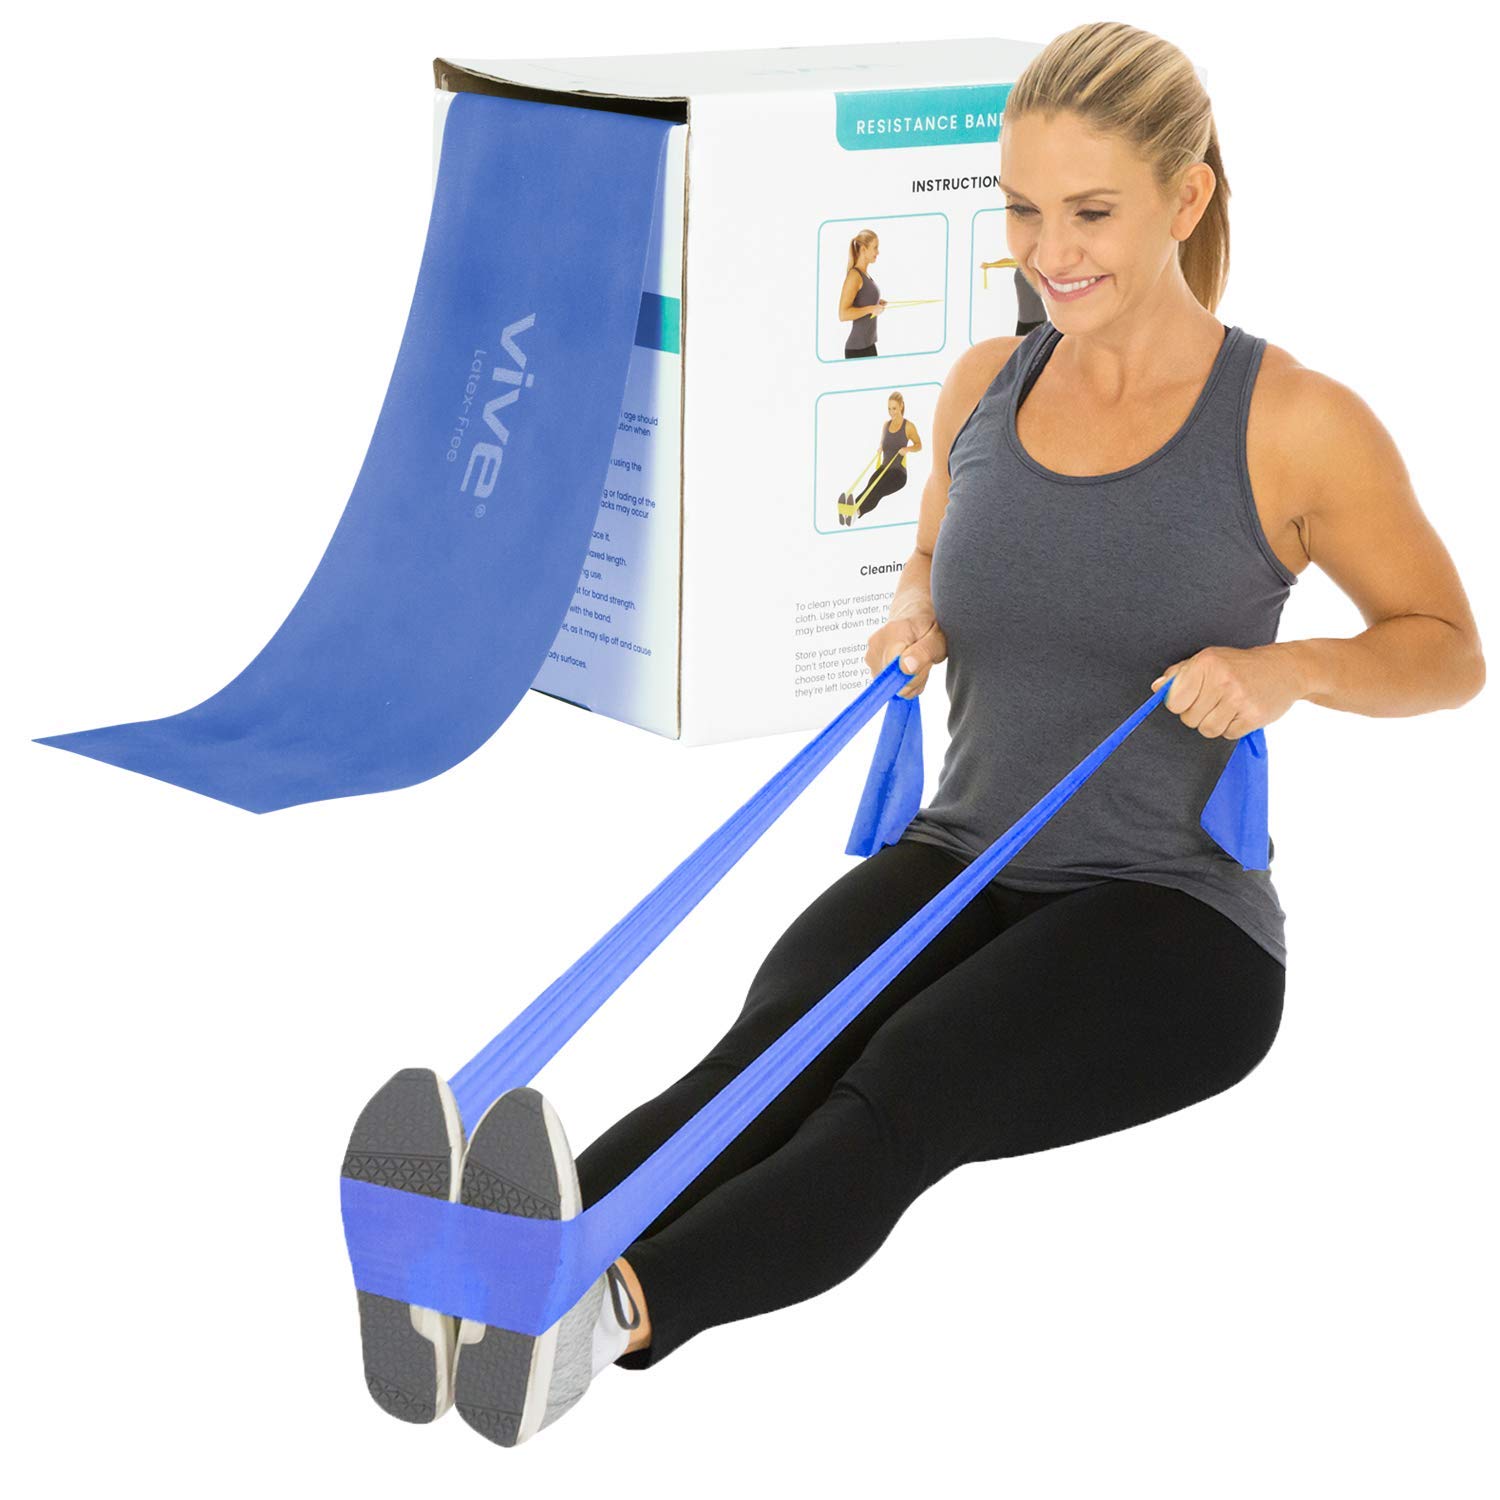 Vive Resistance Band Rolls (75 Feet) - Non-Latex Professional Box for Physical Therapy, Lower, Upper Body Exercise Workout - 25 Yard Straight Elast...